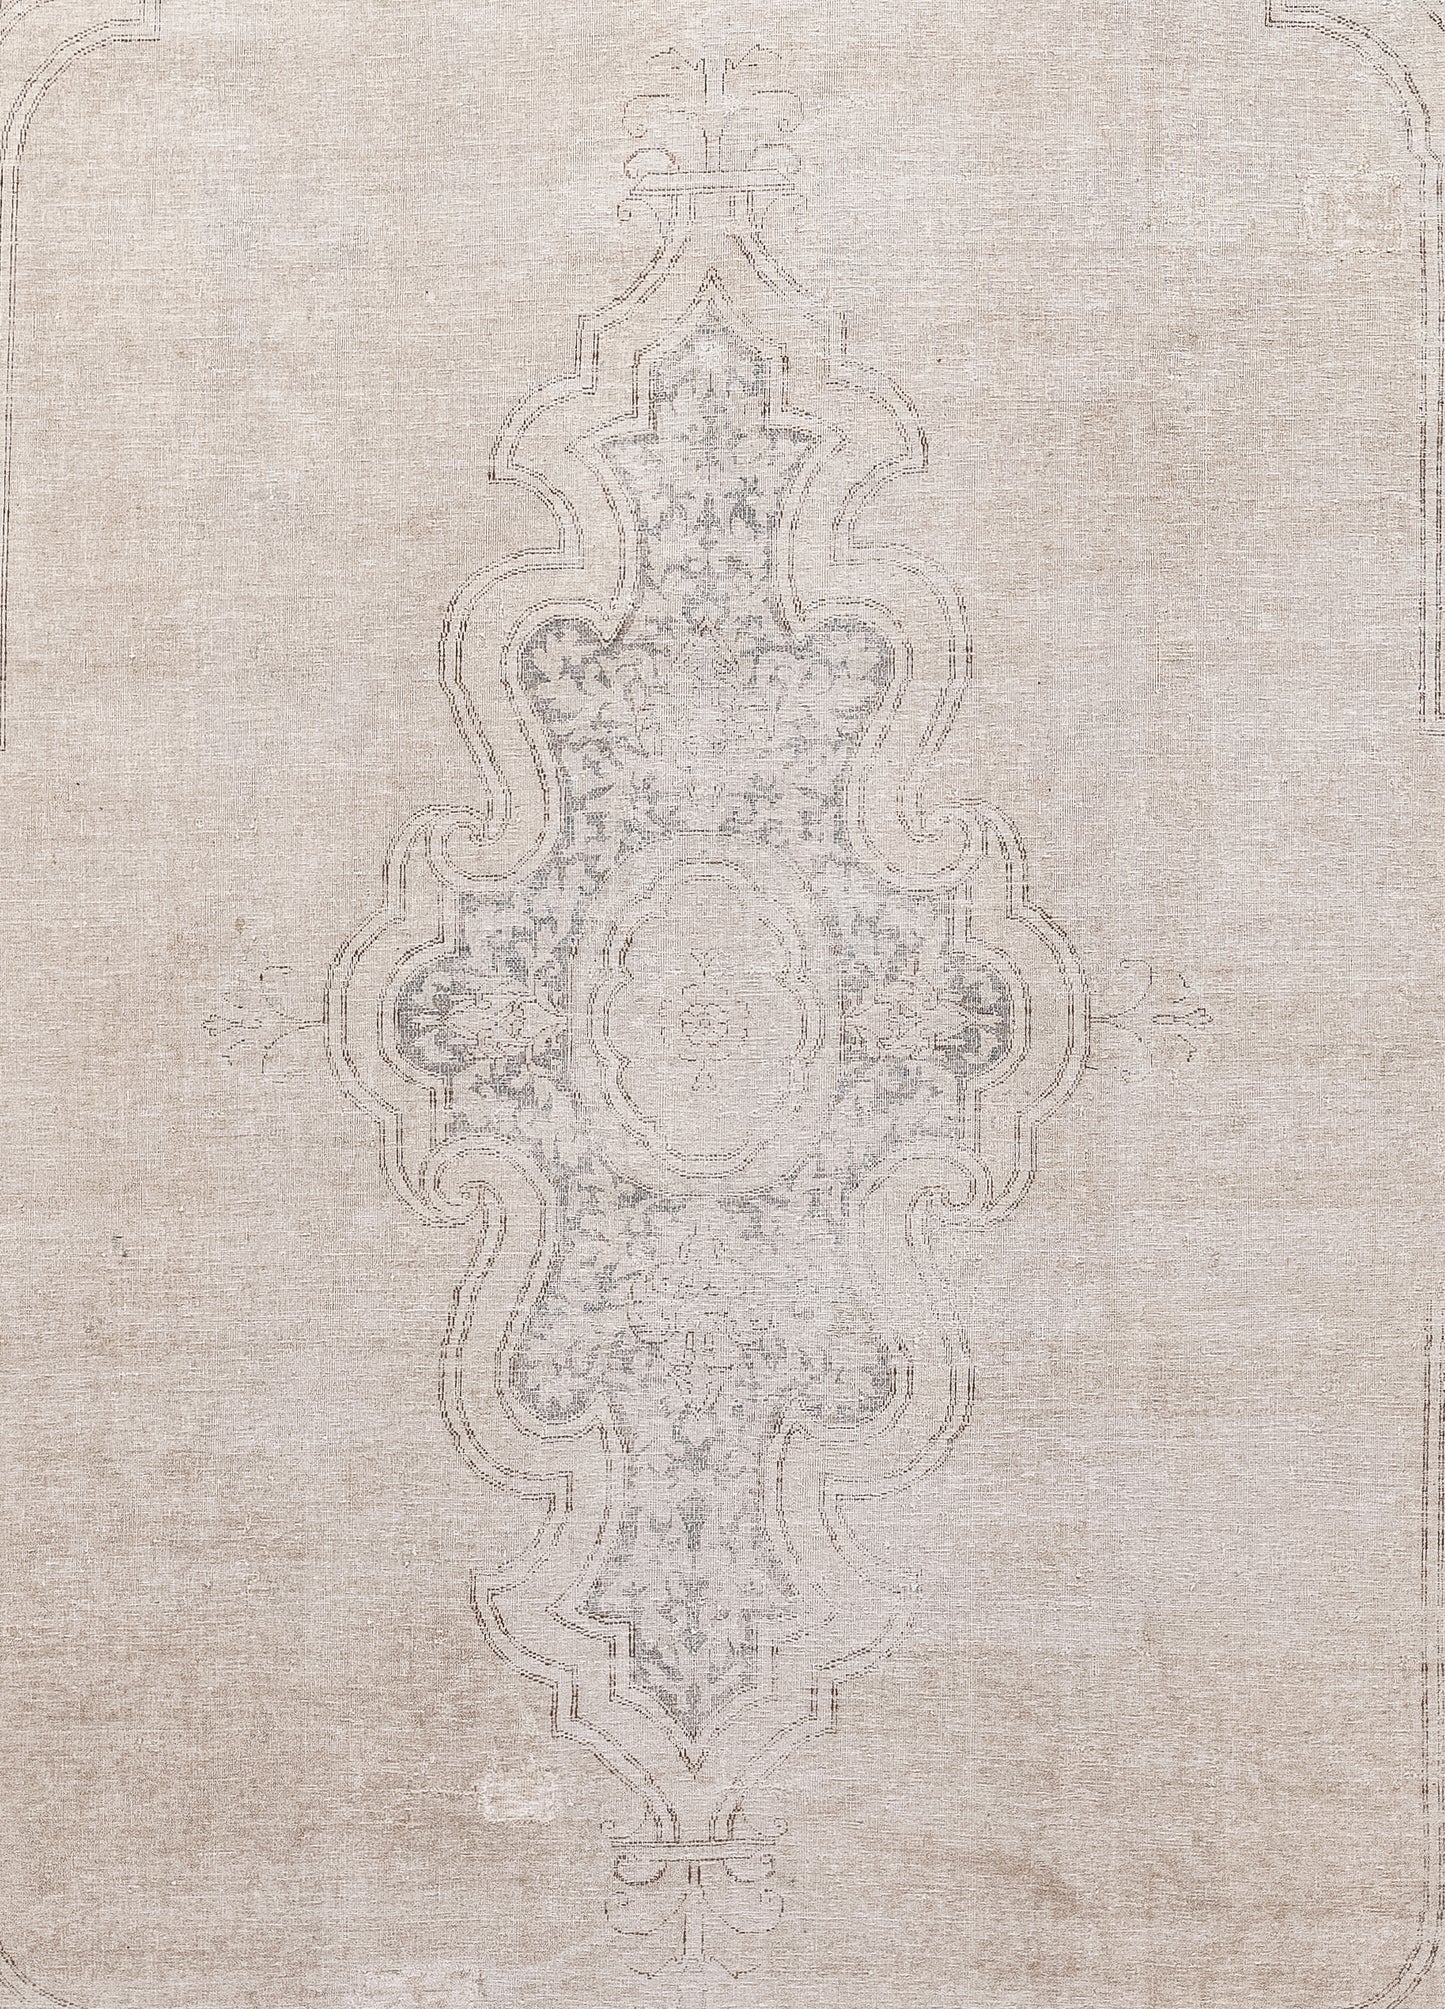 The foreground of the rug comes with a sophisticated heraldry made up fleurs-de-lis.